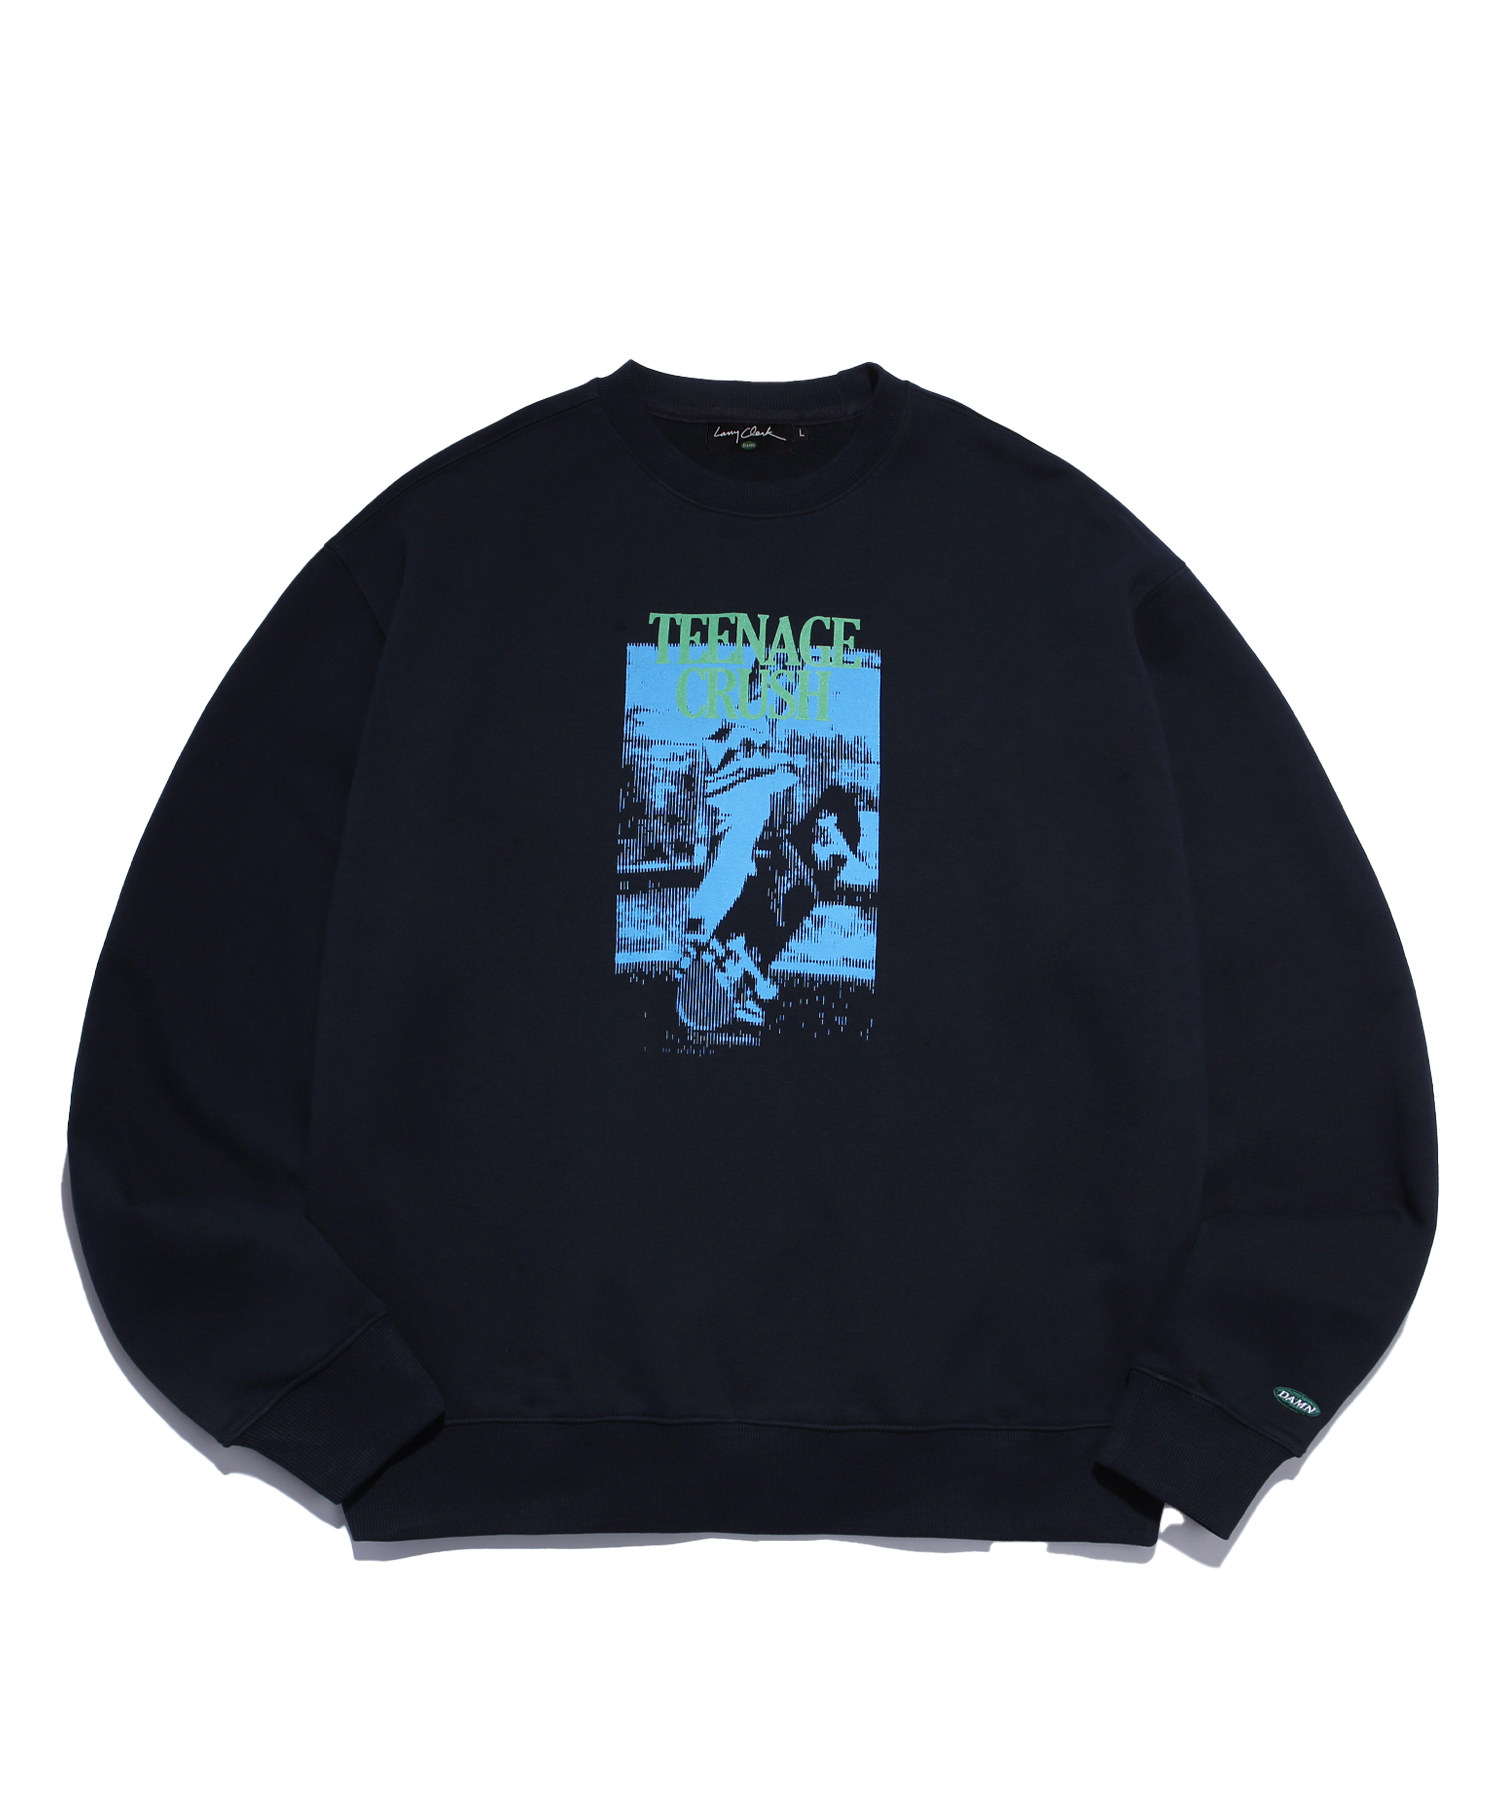 THE SMELL OF US SKATE CREWNECK NAVY